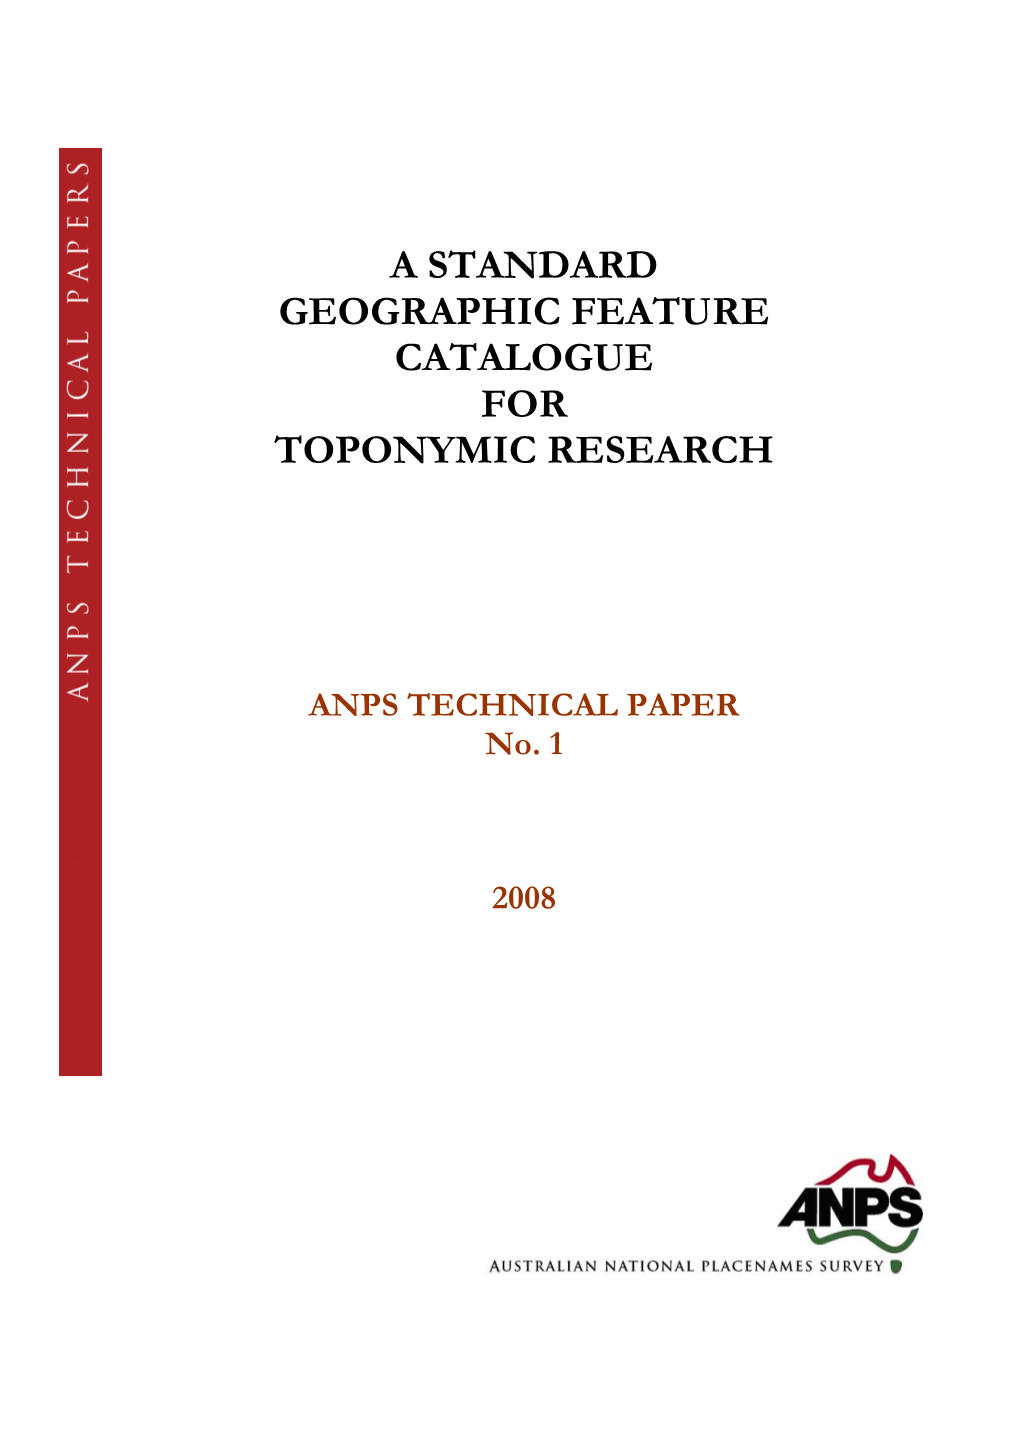 A Standard Geographic Feature Catalogue for Toponymic Research